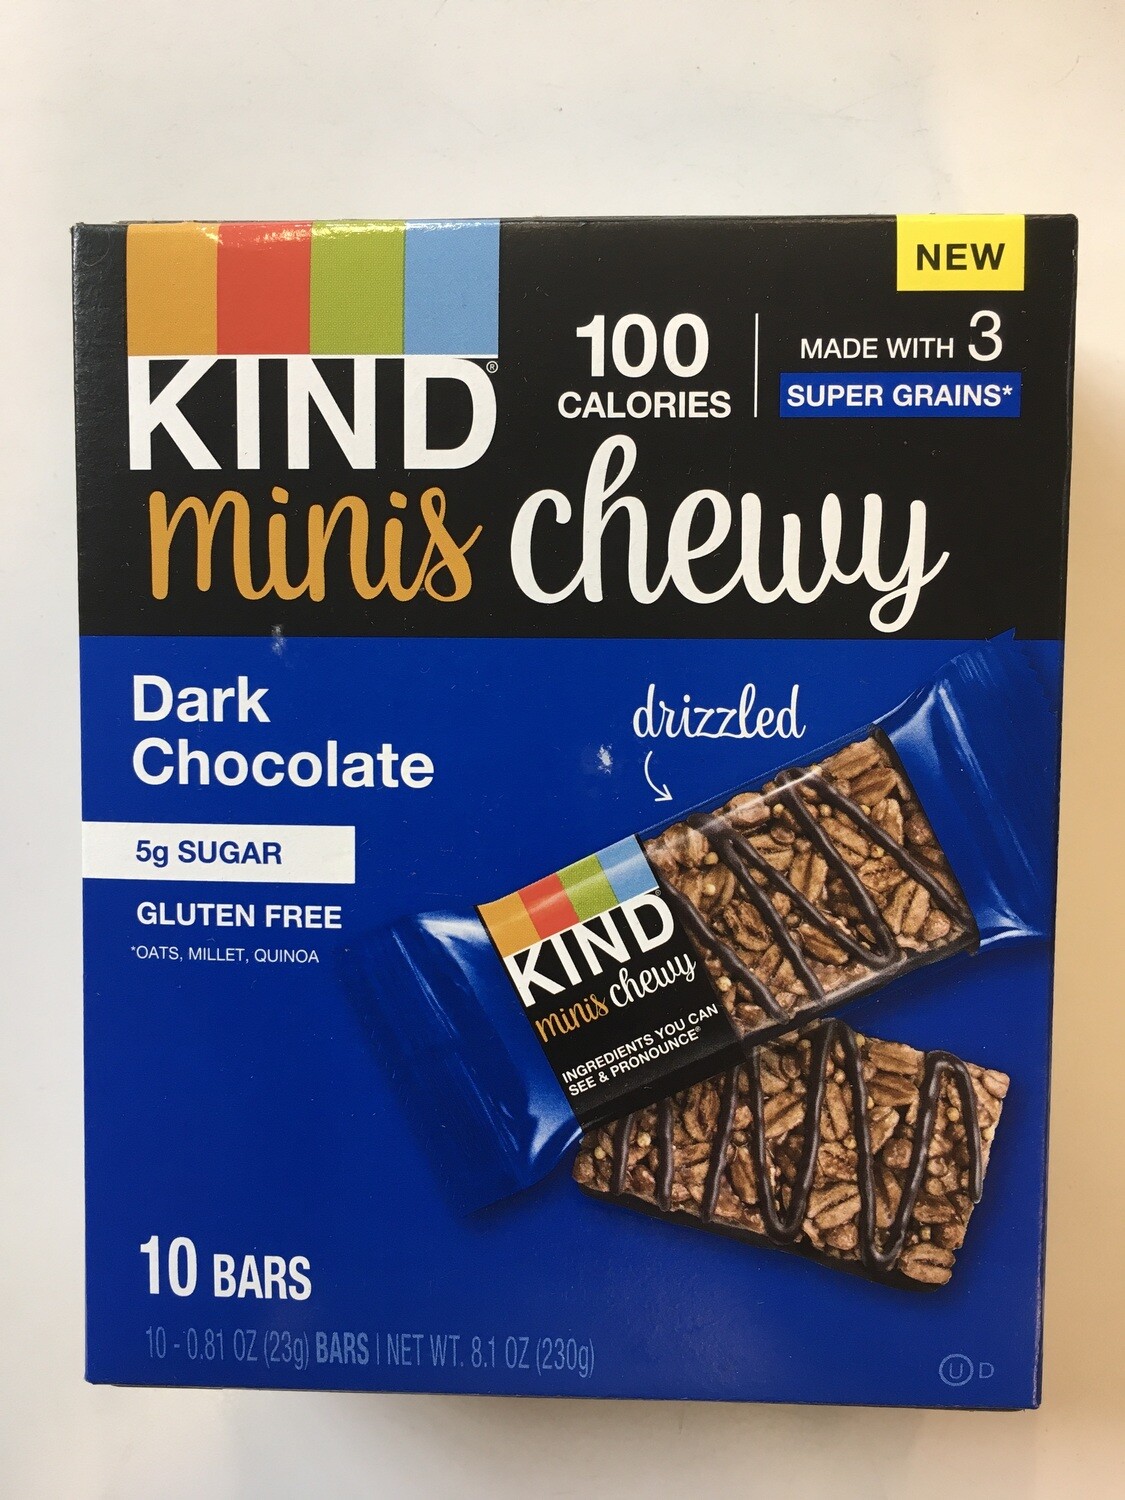 Snack / Bar / Kind Minis Dark Chocolate Chewy 10 pack